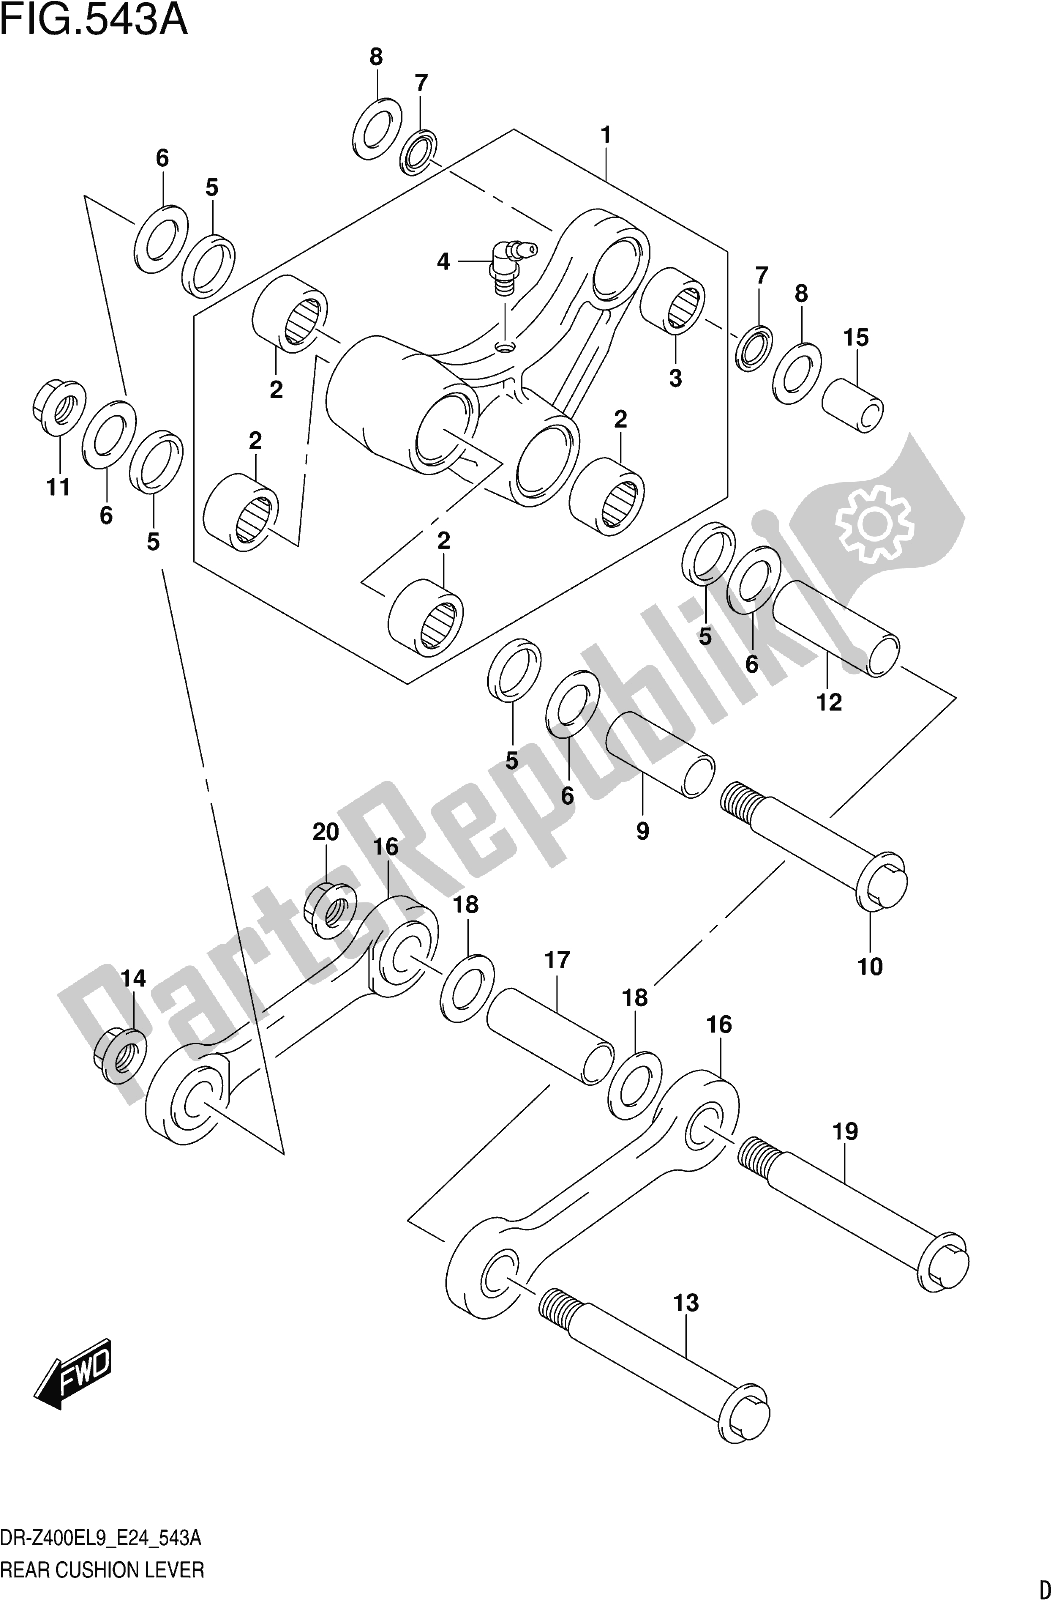 All parts for the Fig. 543a Rear Cushion Lever of the Suzuki DR-Z 400E 2019